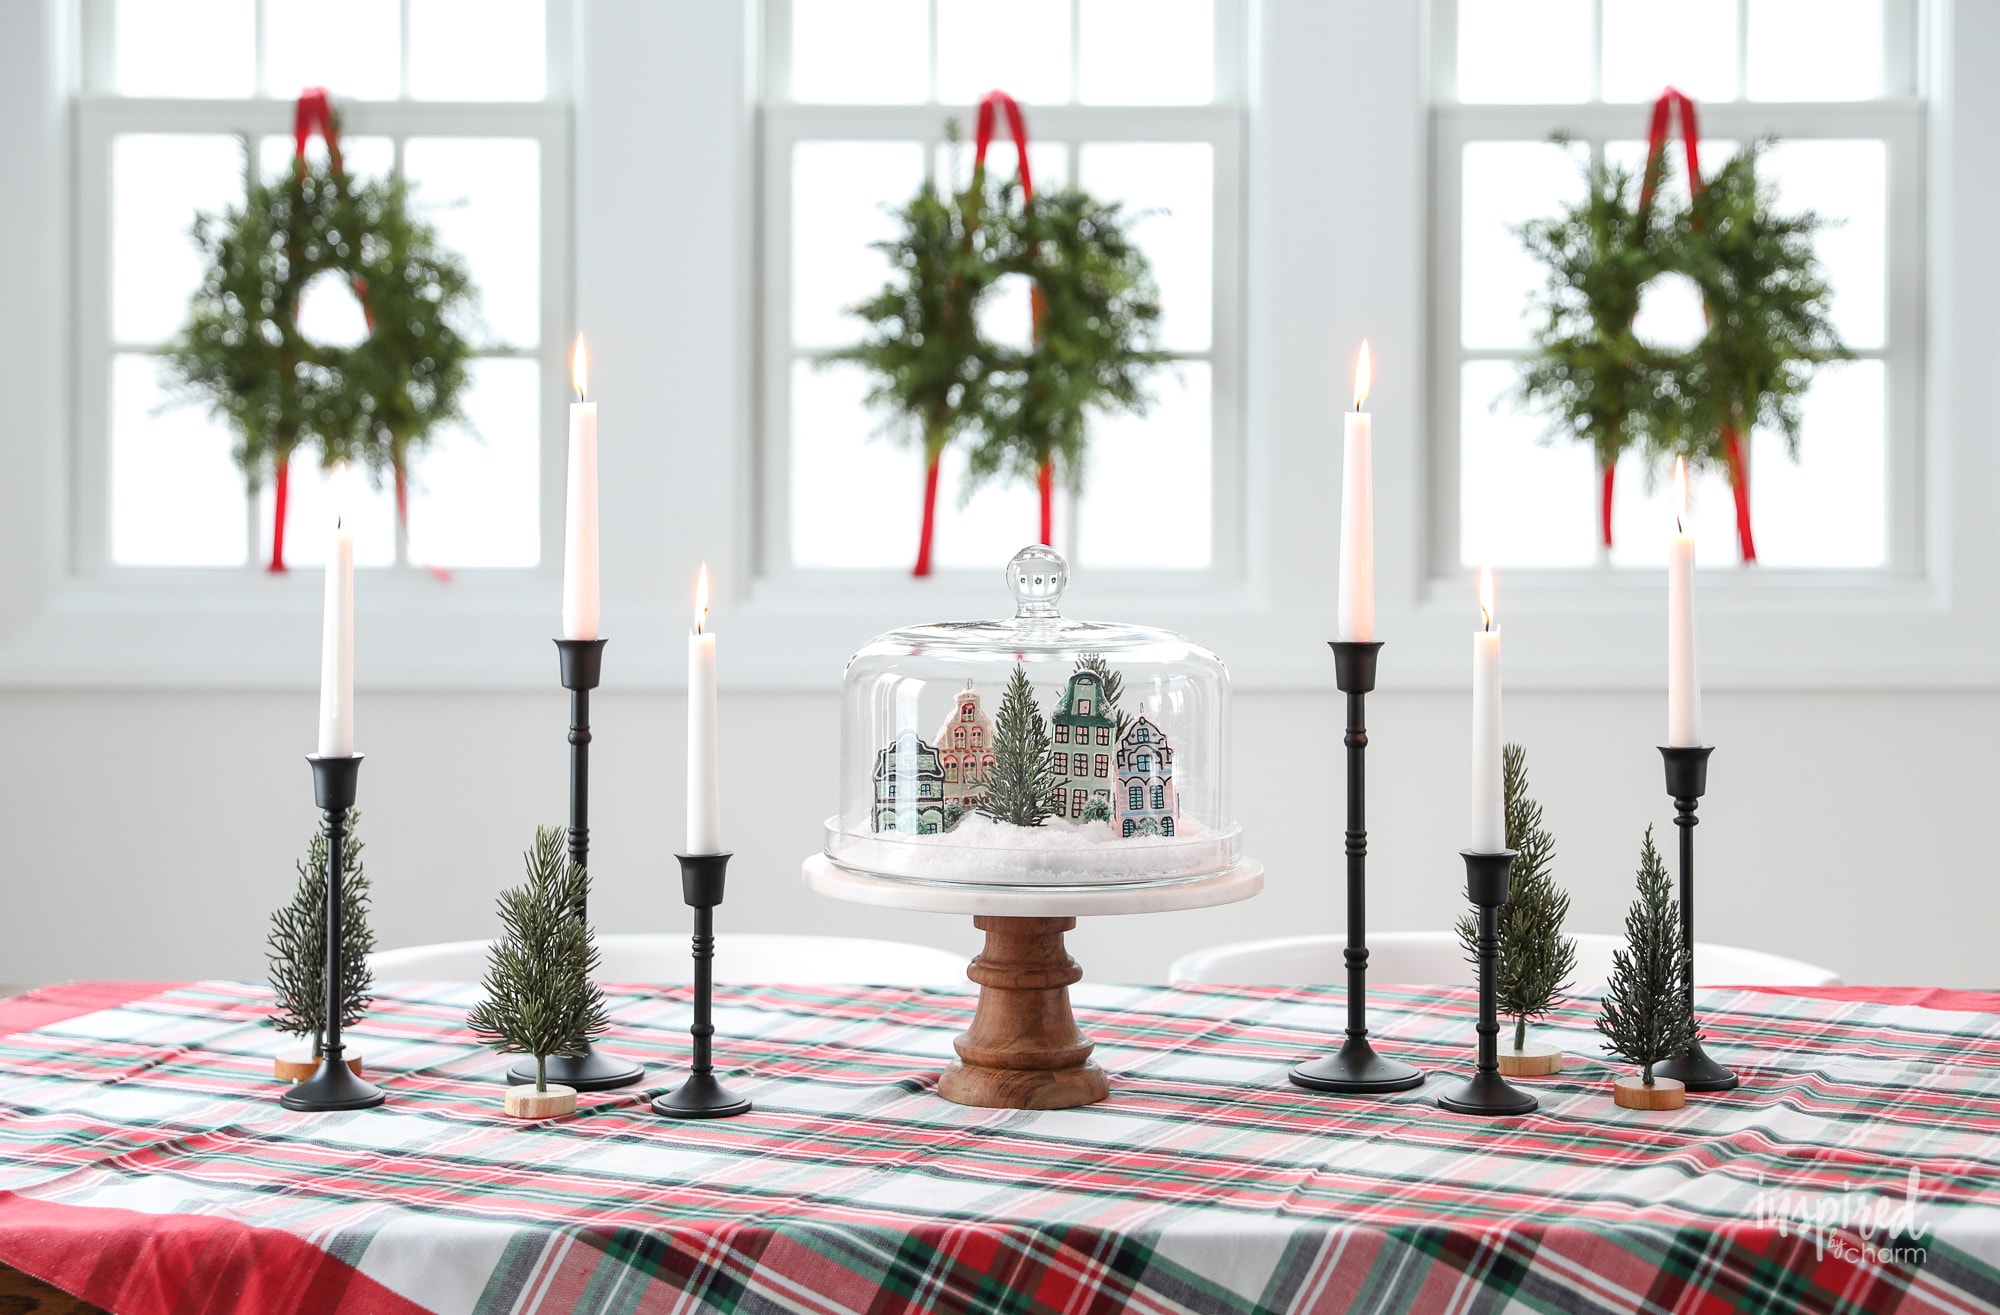 How to Create a Simple Christmas Centerpiece #christmas #centerpiece #table #decor #holiday #diningroom #decorations #tablescape